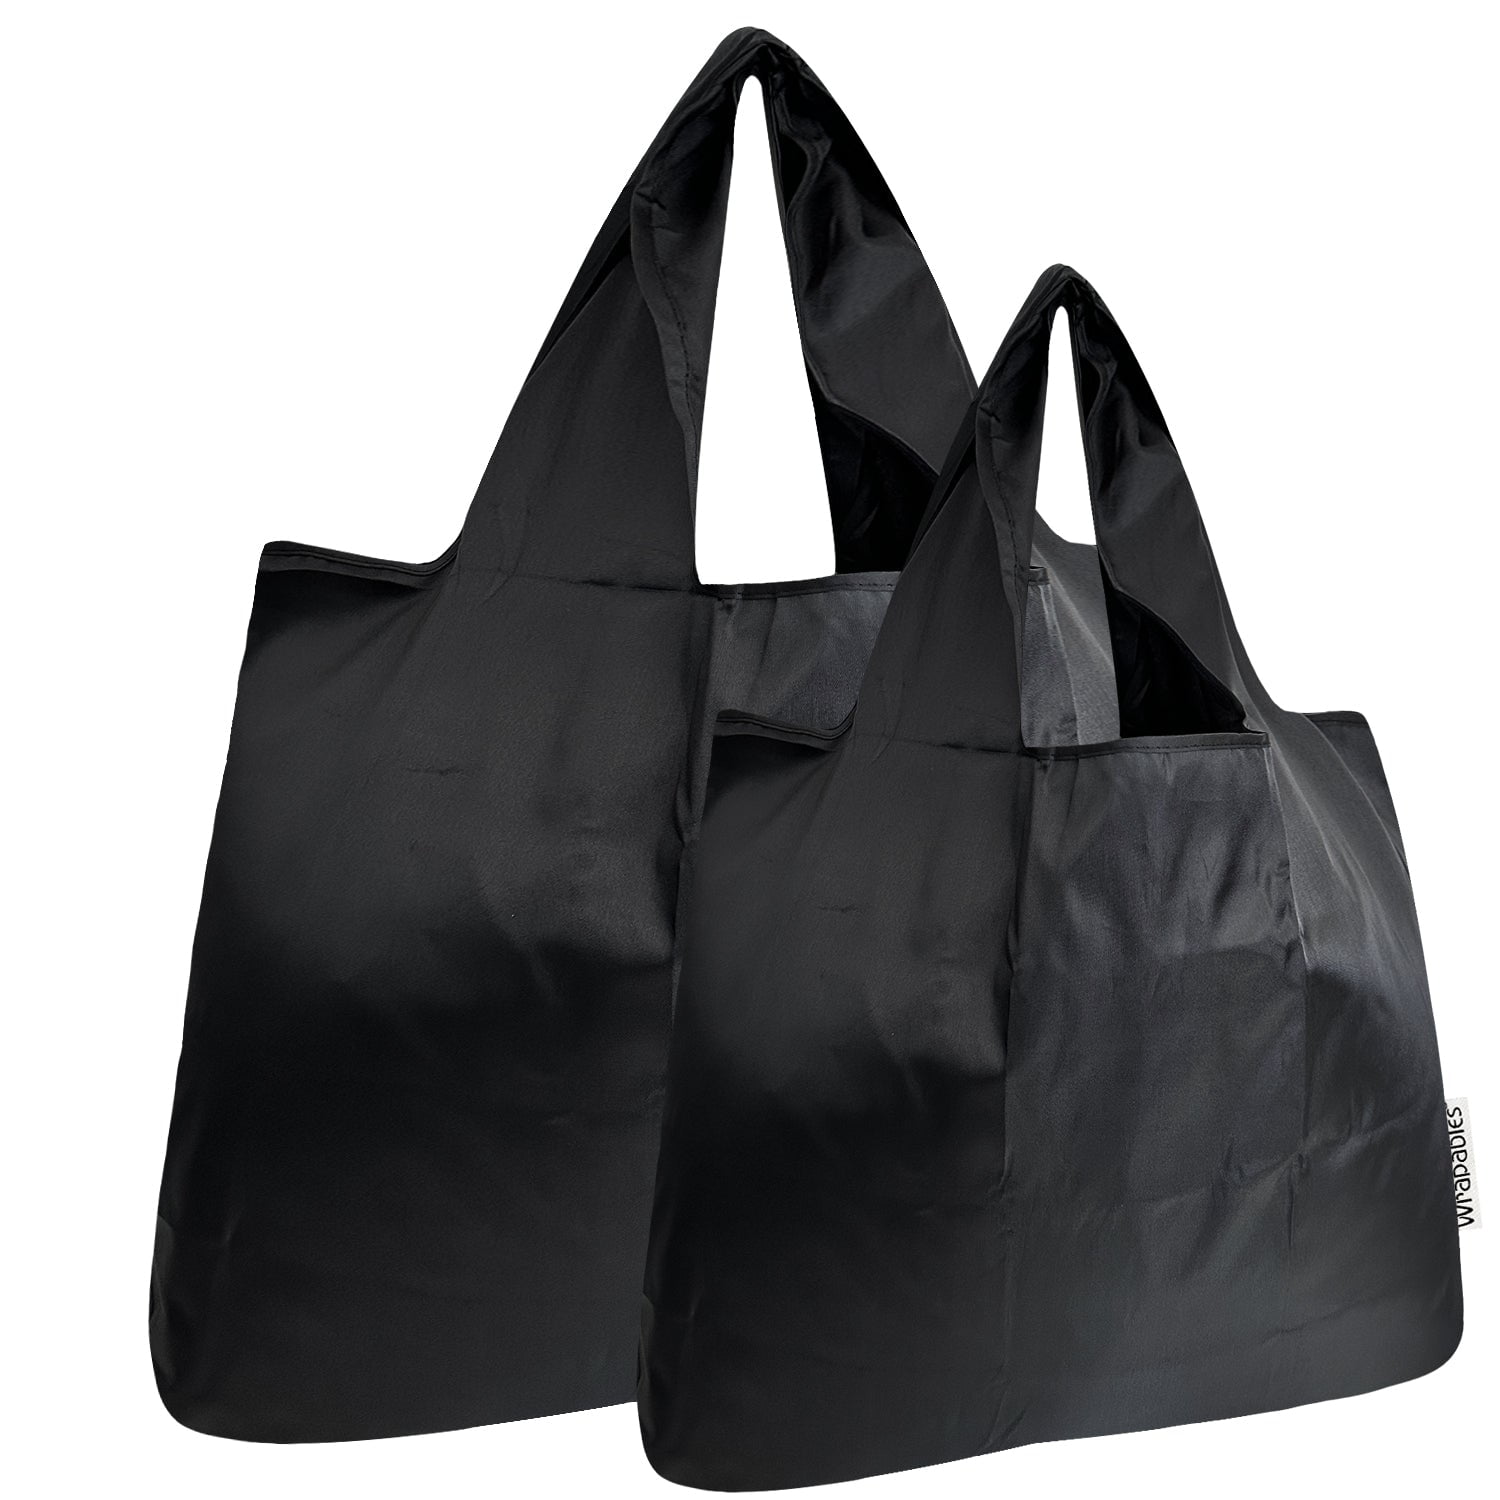 Wrapables Large & Small Foldable Tote Nylon Reusable Grocery Bags, Set of  2, Black 